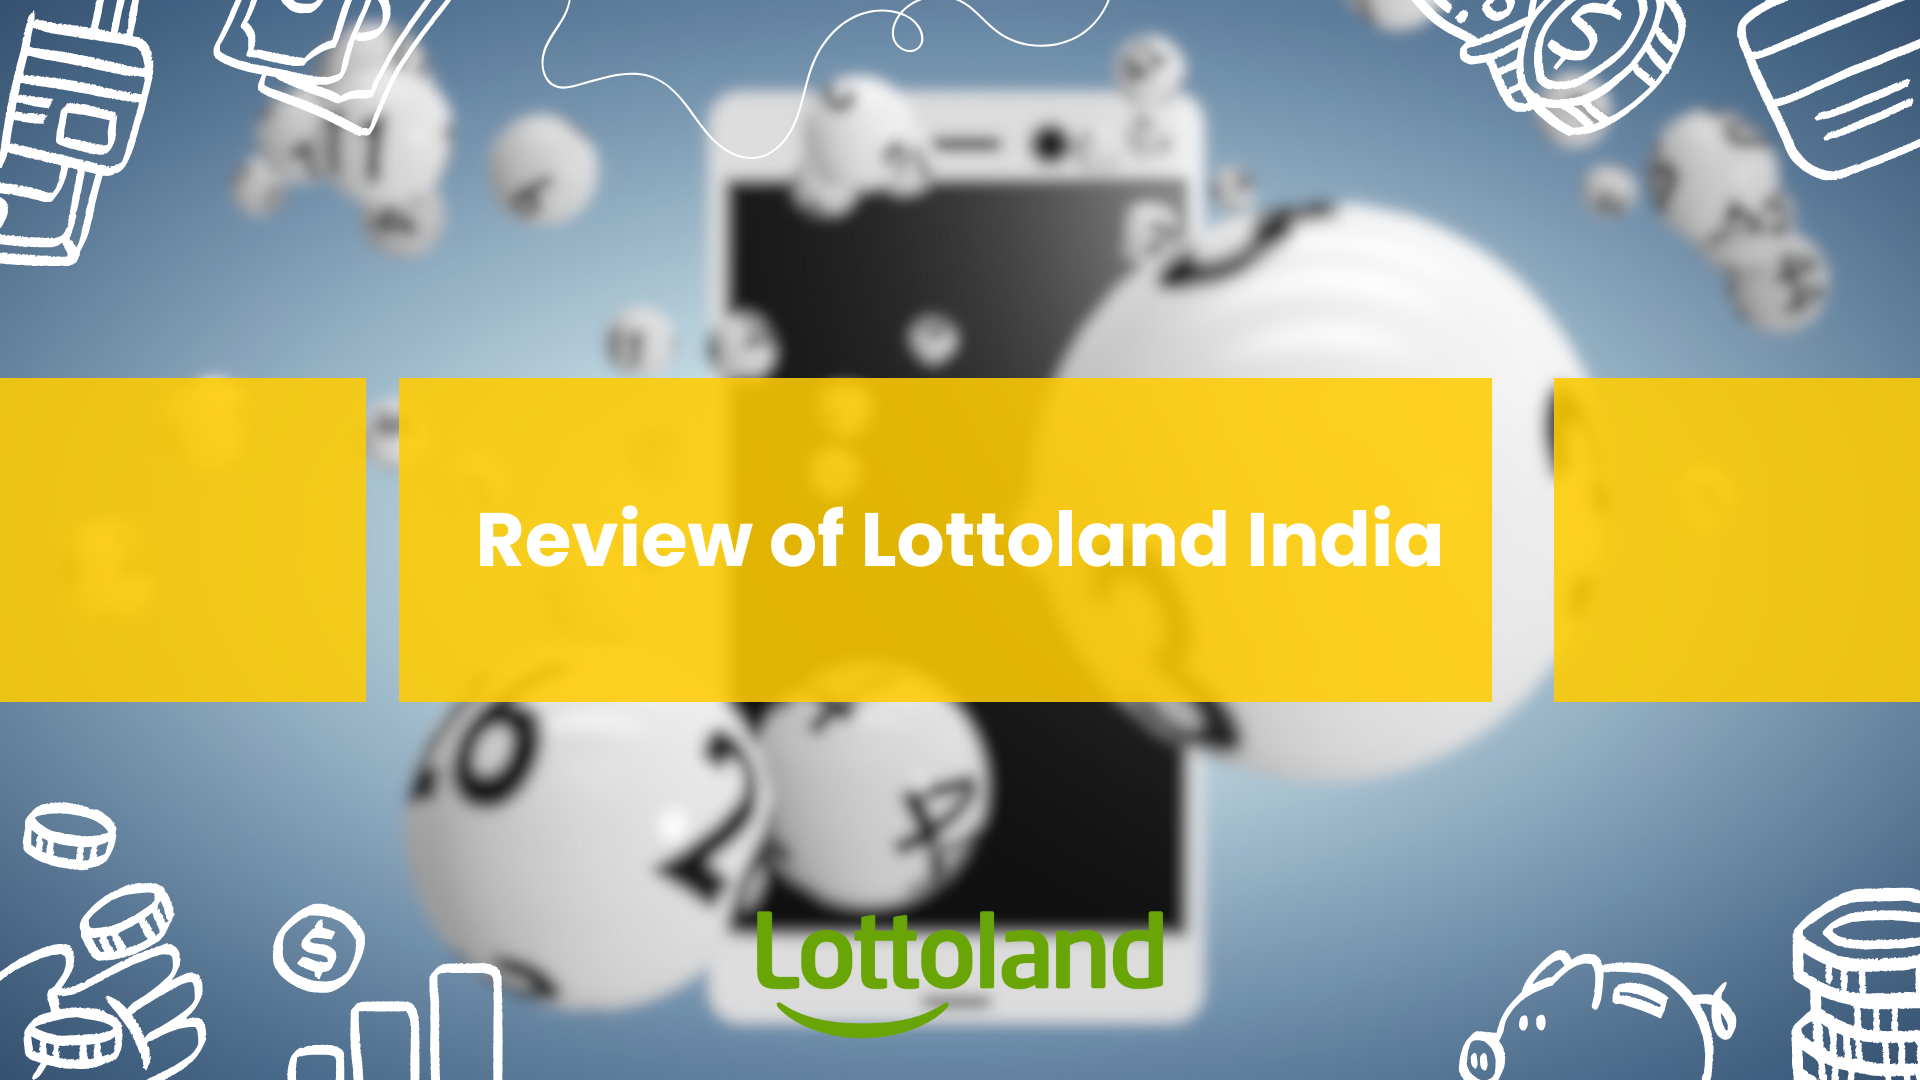 Review of Lottoland India